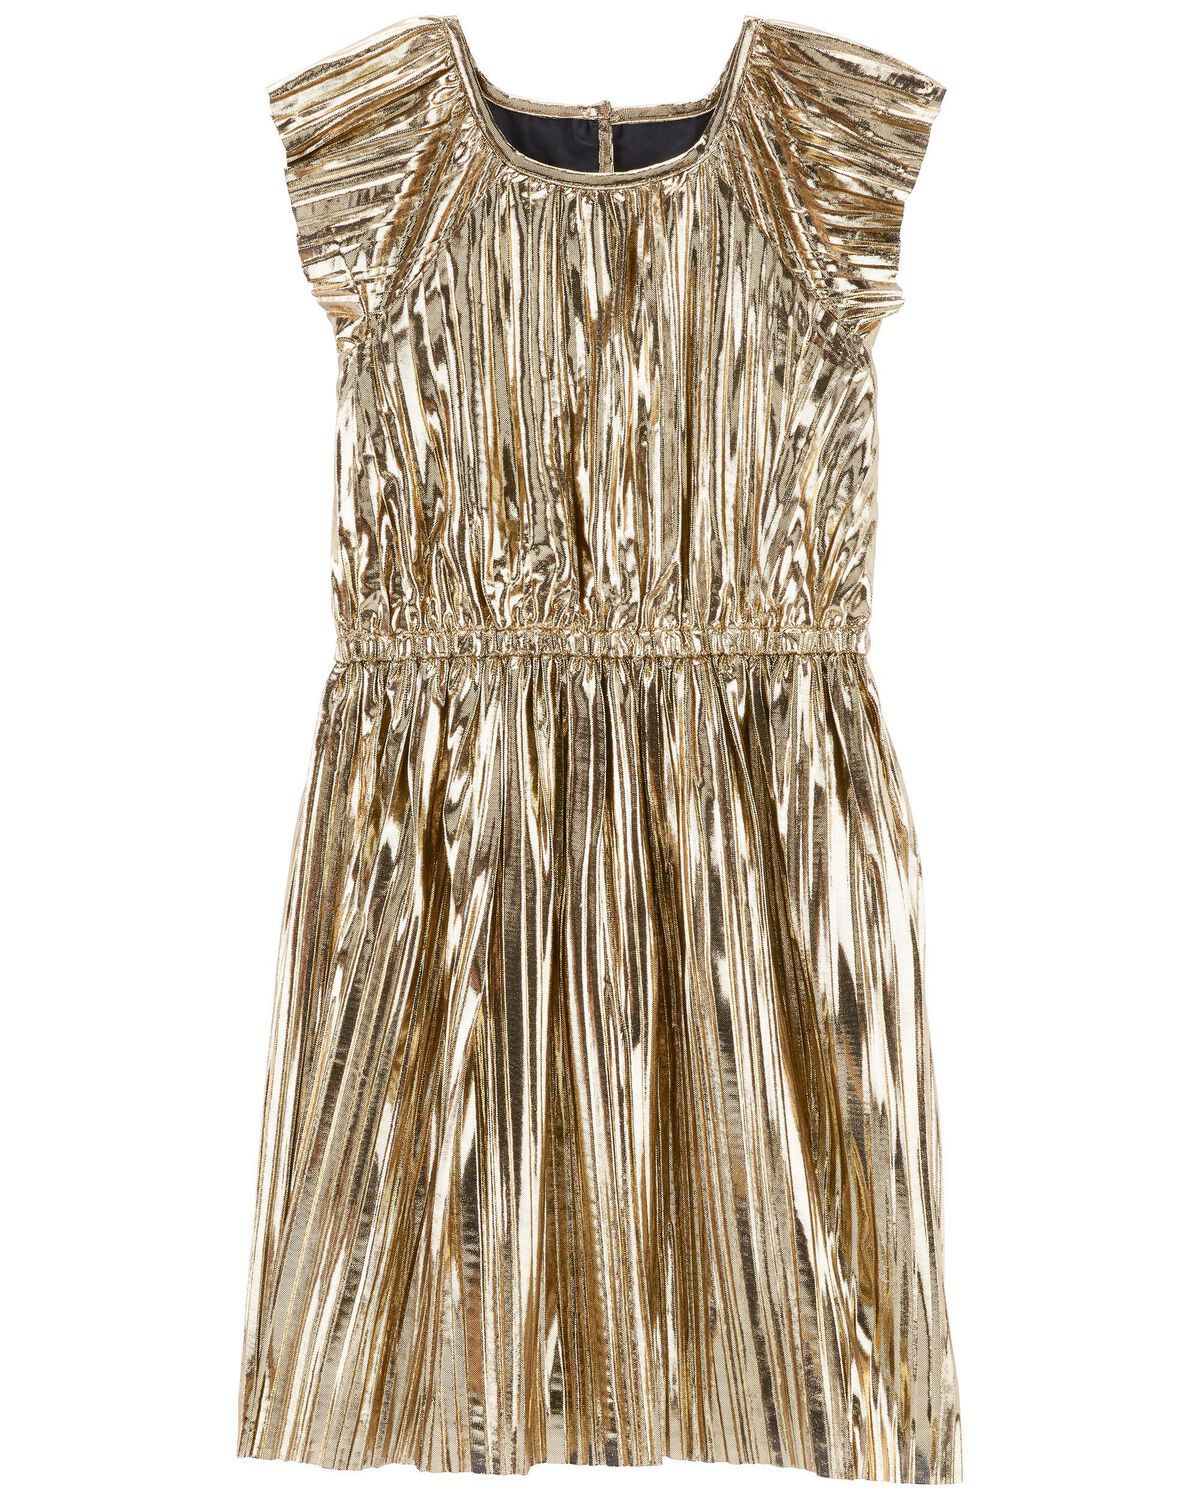 Gold Kid Metallic Pleated Party Dress | carters.com | Carter's